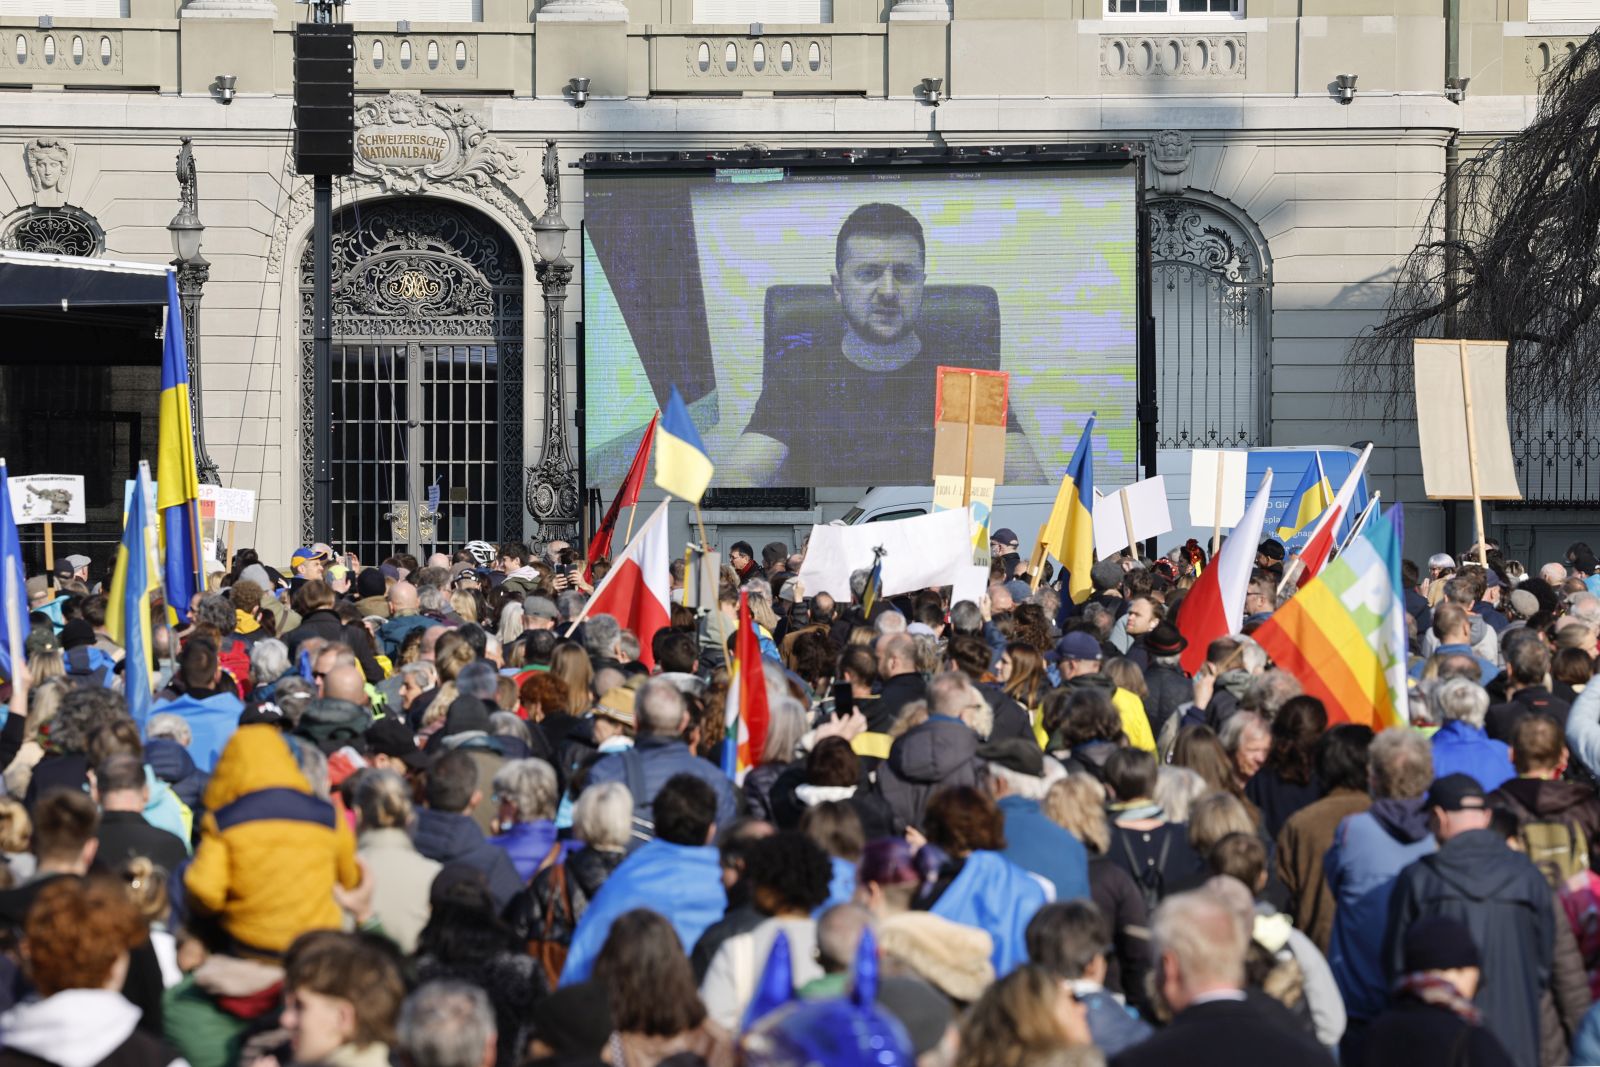 epa09835956 Ukrainian President Volodymyr Zelensky is displayed on a screen during a demonstration against the Russian invasion of Ukraine in front of the Swiss parliament building in Bern, Switzerland, 19 March 2022.  EPA/PETER KLAUNZER